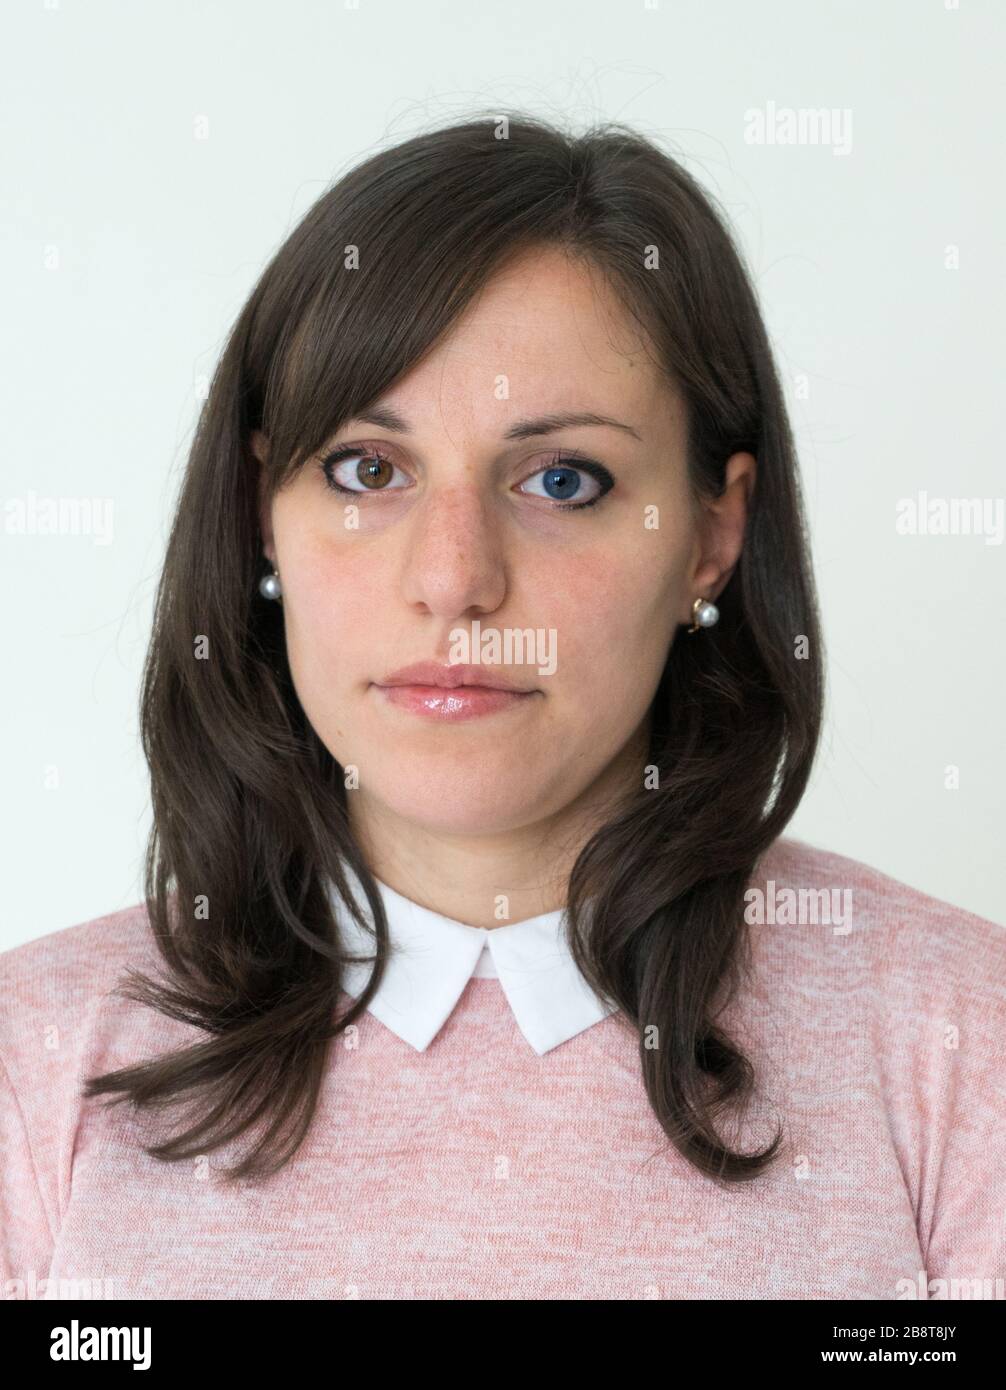 Heterochromia. Young caucasian woman with different colored pupils poses on white background. Brown and blue. Stock Photo